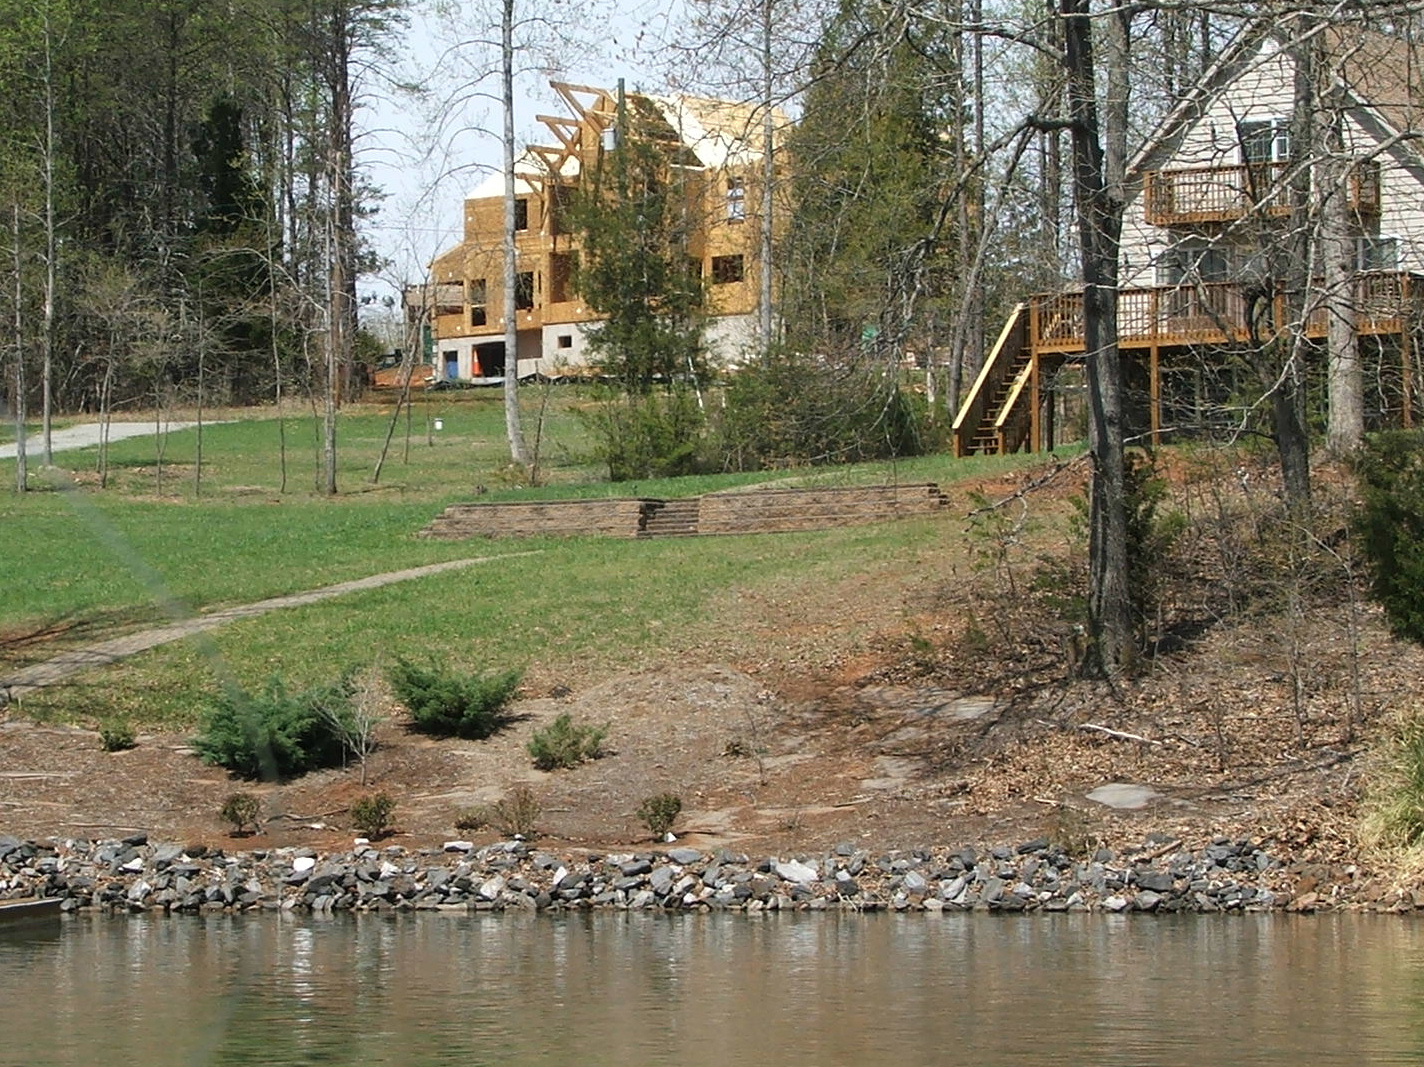 As seen from the lake cove